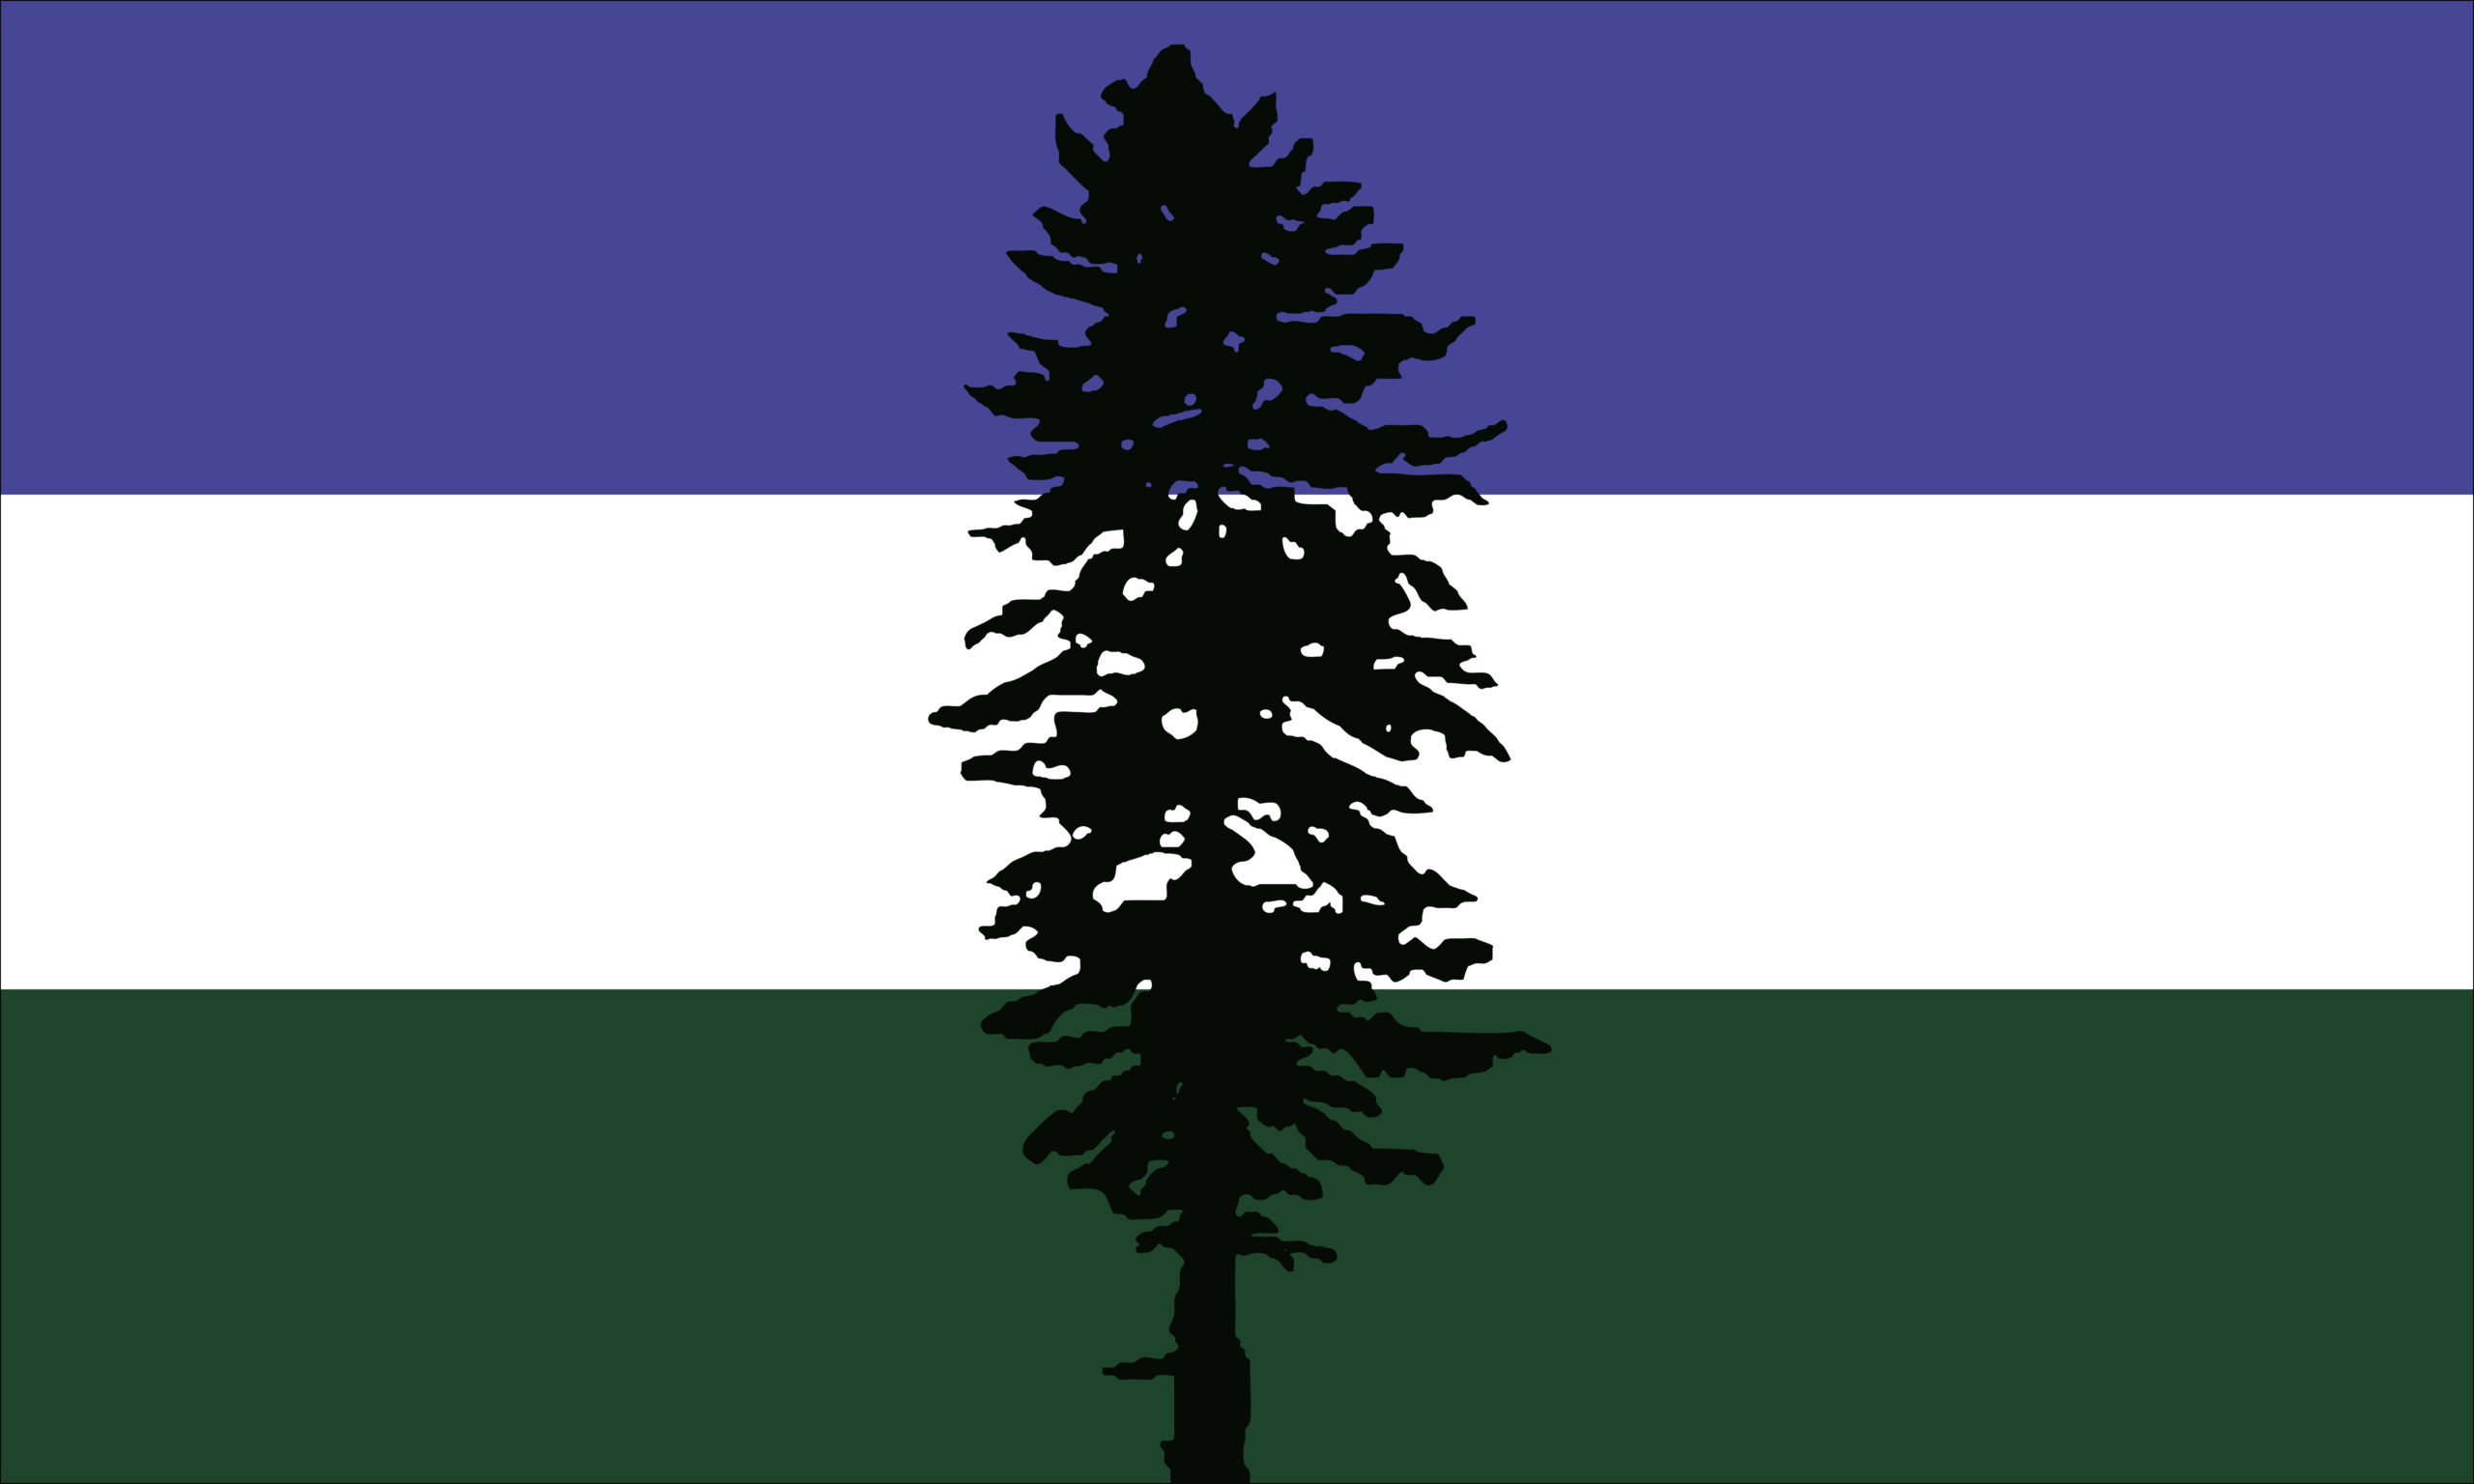 The Cascadia Doug flag is a symbol for our landscape and is a direct representation of the bioregion, and for our movement. Designed in 1994 by Portland native Alexander Baretich, the blue represents the moisture-rich sky above, and Pacific Ocean, along with the Salish Sea, lakes, and inland waters. The white represents snow and clouds, the green represents the evergreen forests and fields of the Pacific Northwest. The lone-standing Douglas Fir symbolizes endurance, defiance, and resilience.     deptofbioregion.org/use-of-flag